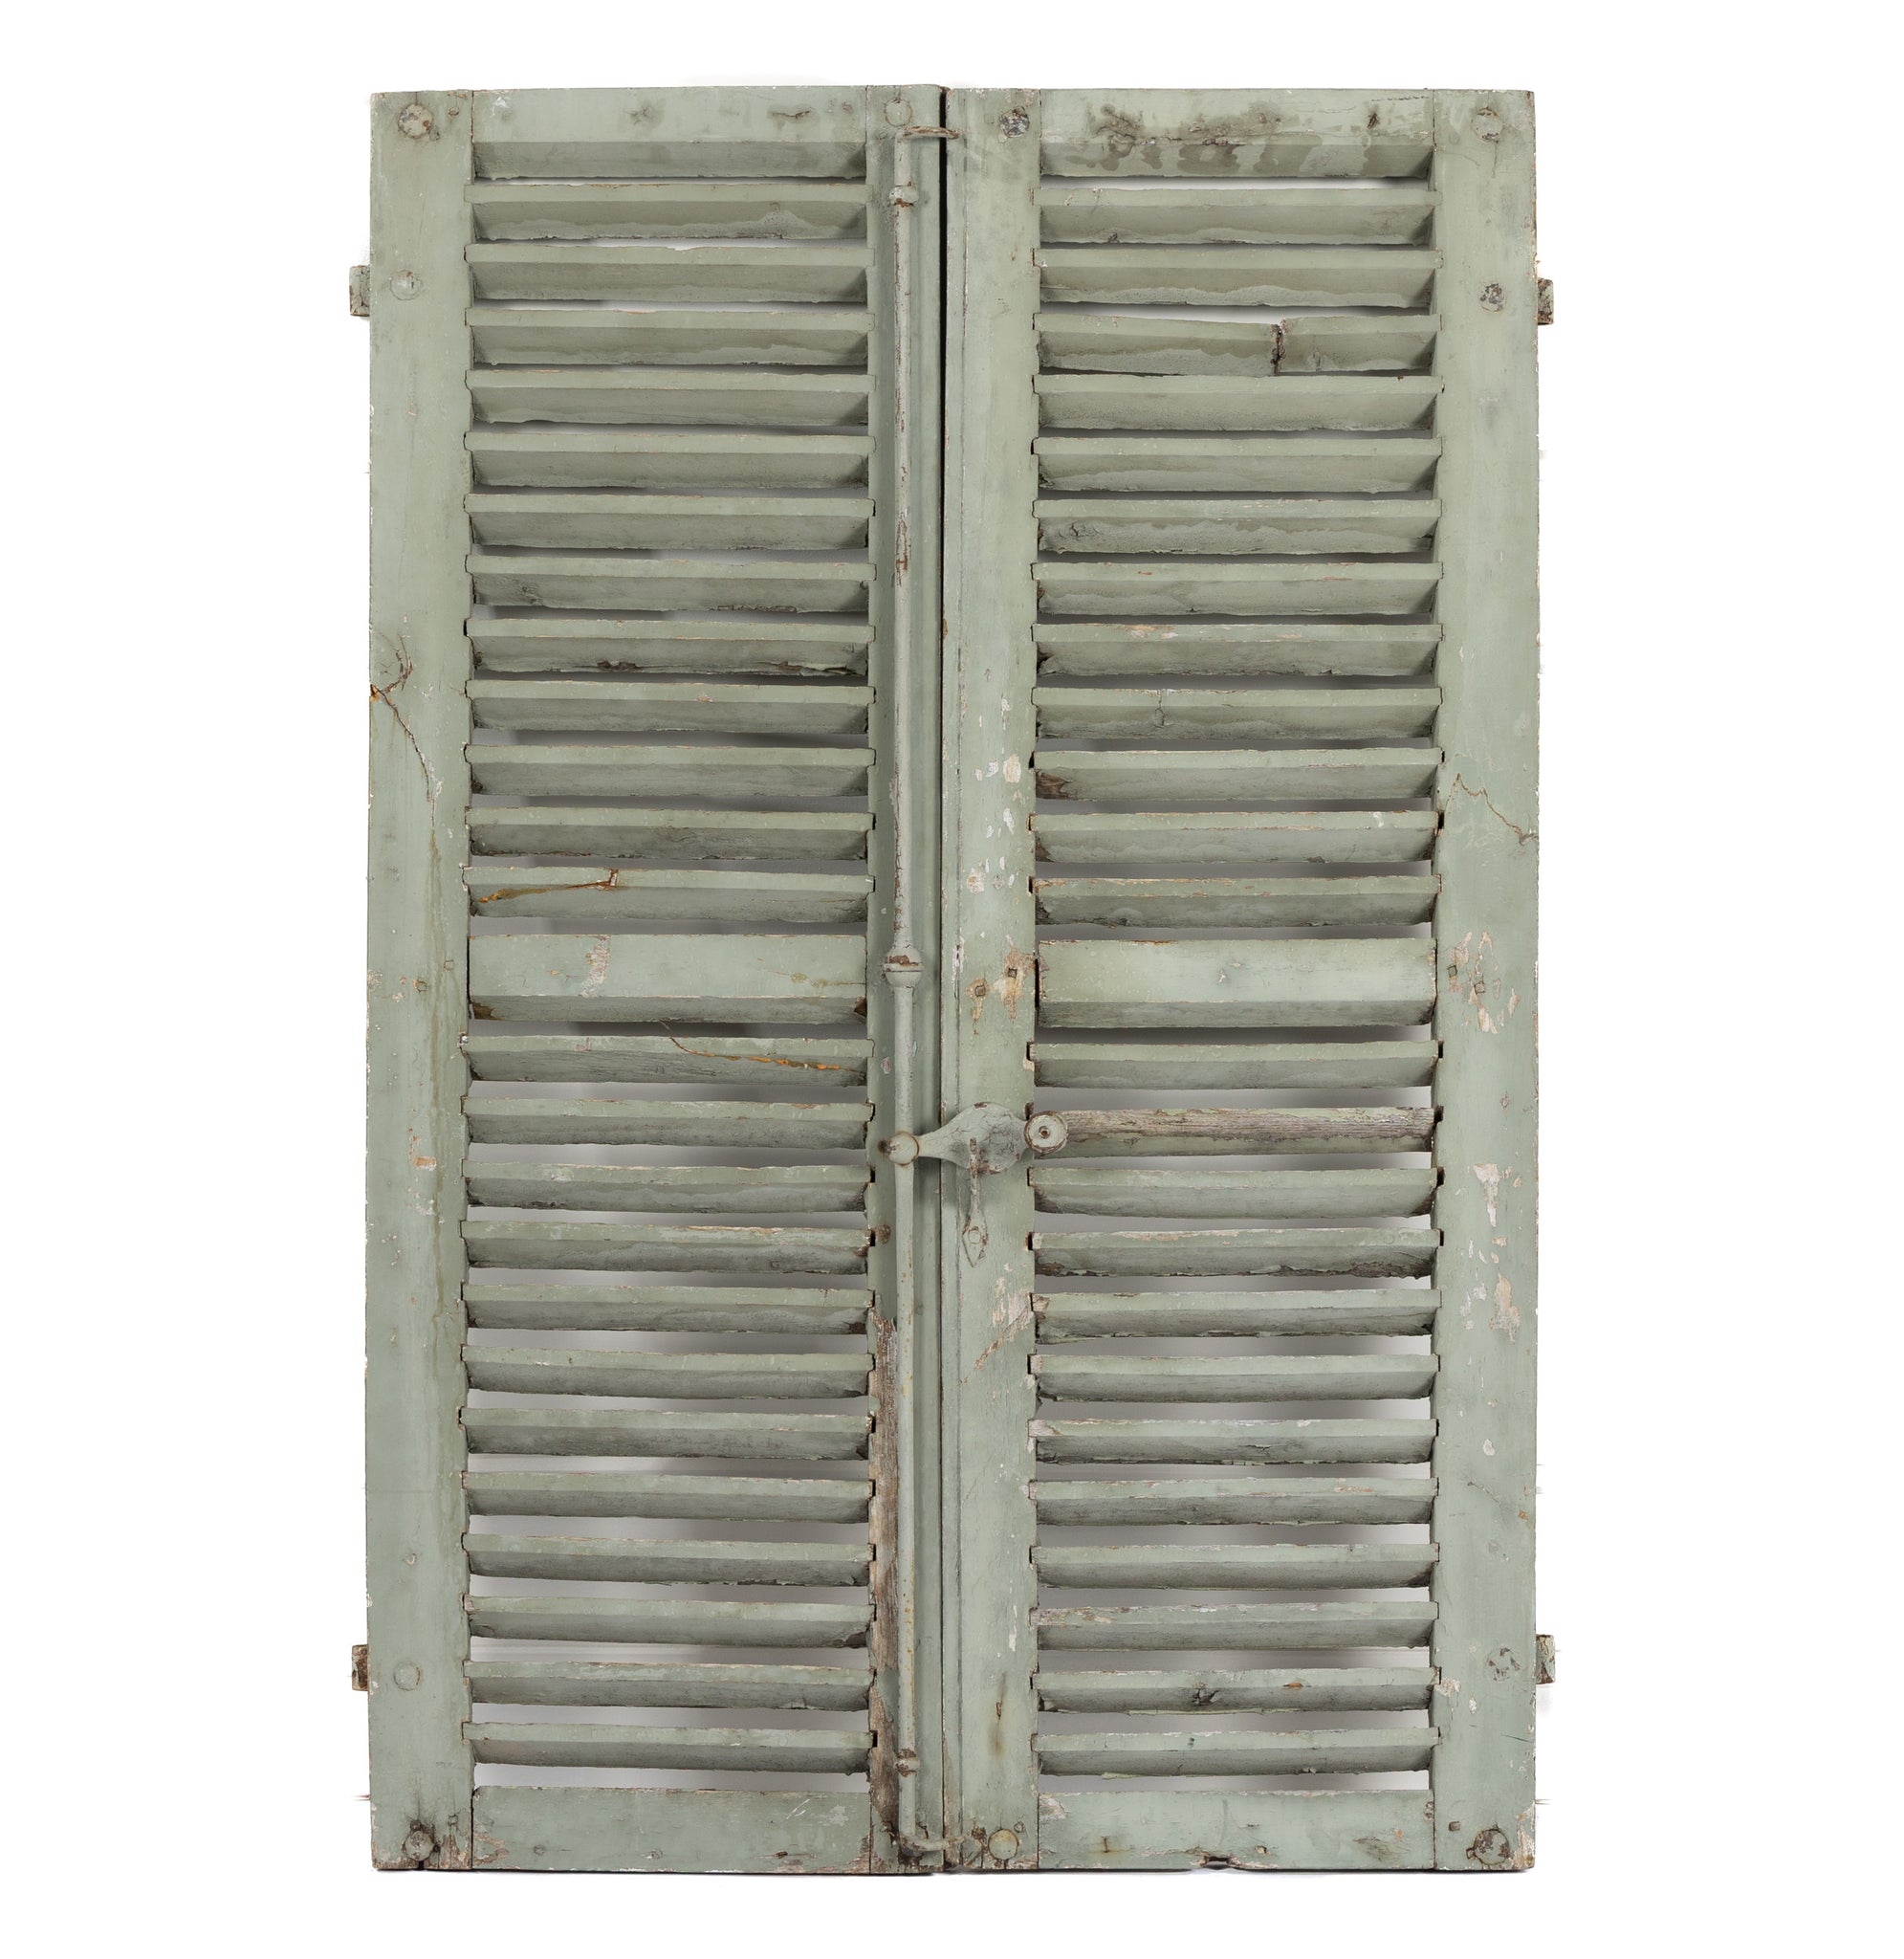 A pair of vintage French soft green/grey painted shutters from Provence.